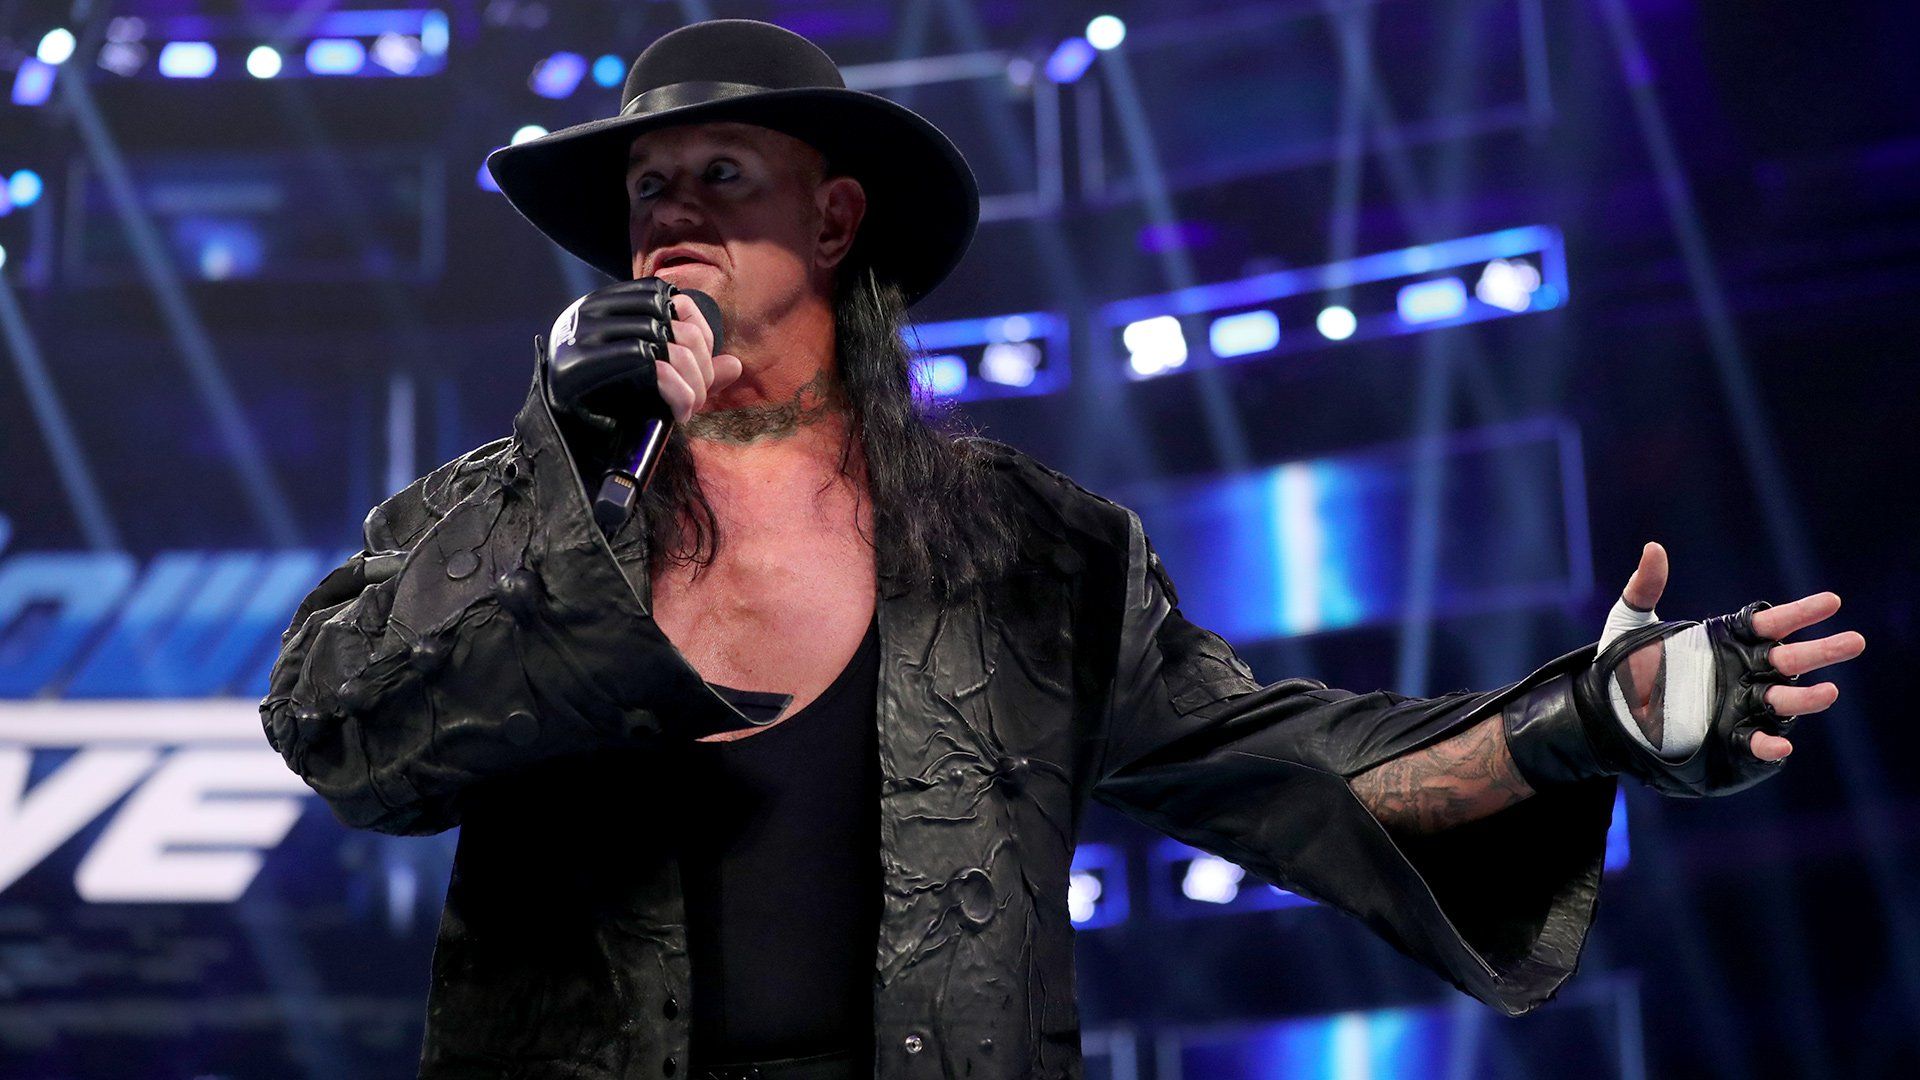 The Undertaker is one of WWE's top stars ever